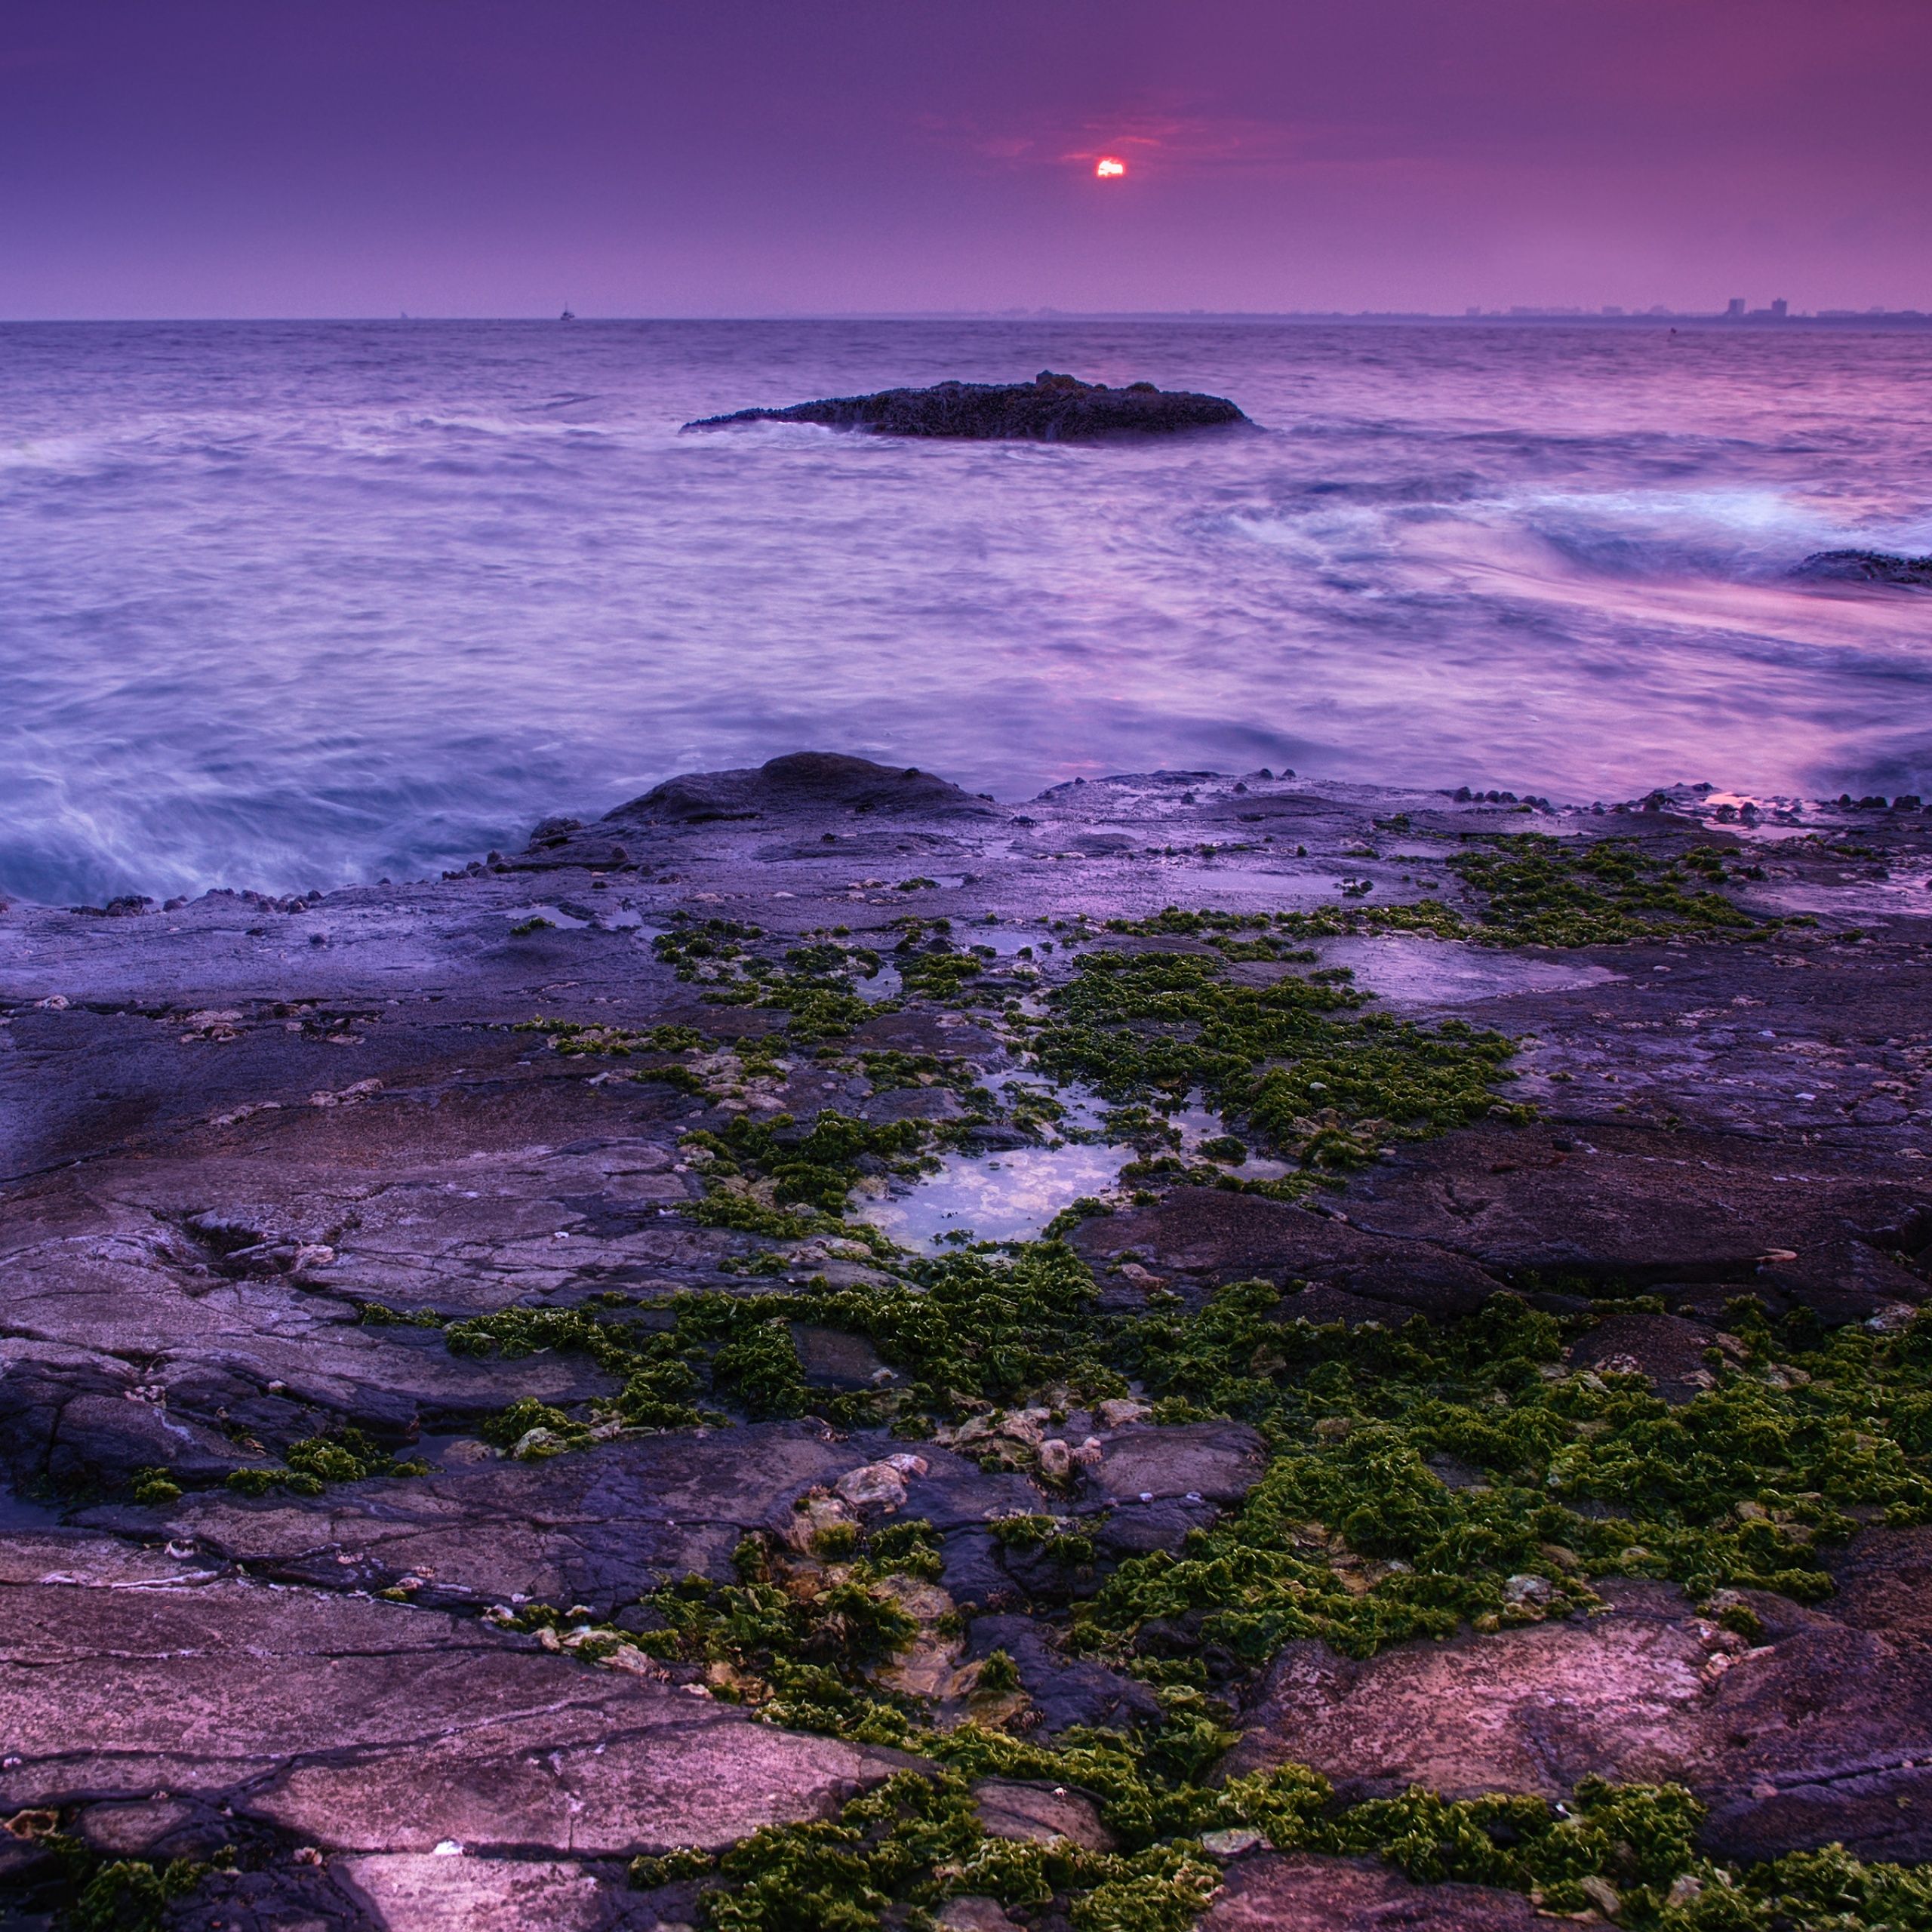 A sunset over the sea with a rocky shore in the foreground - Ocean